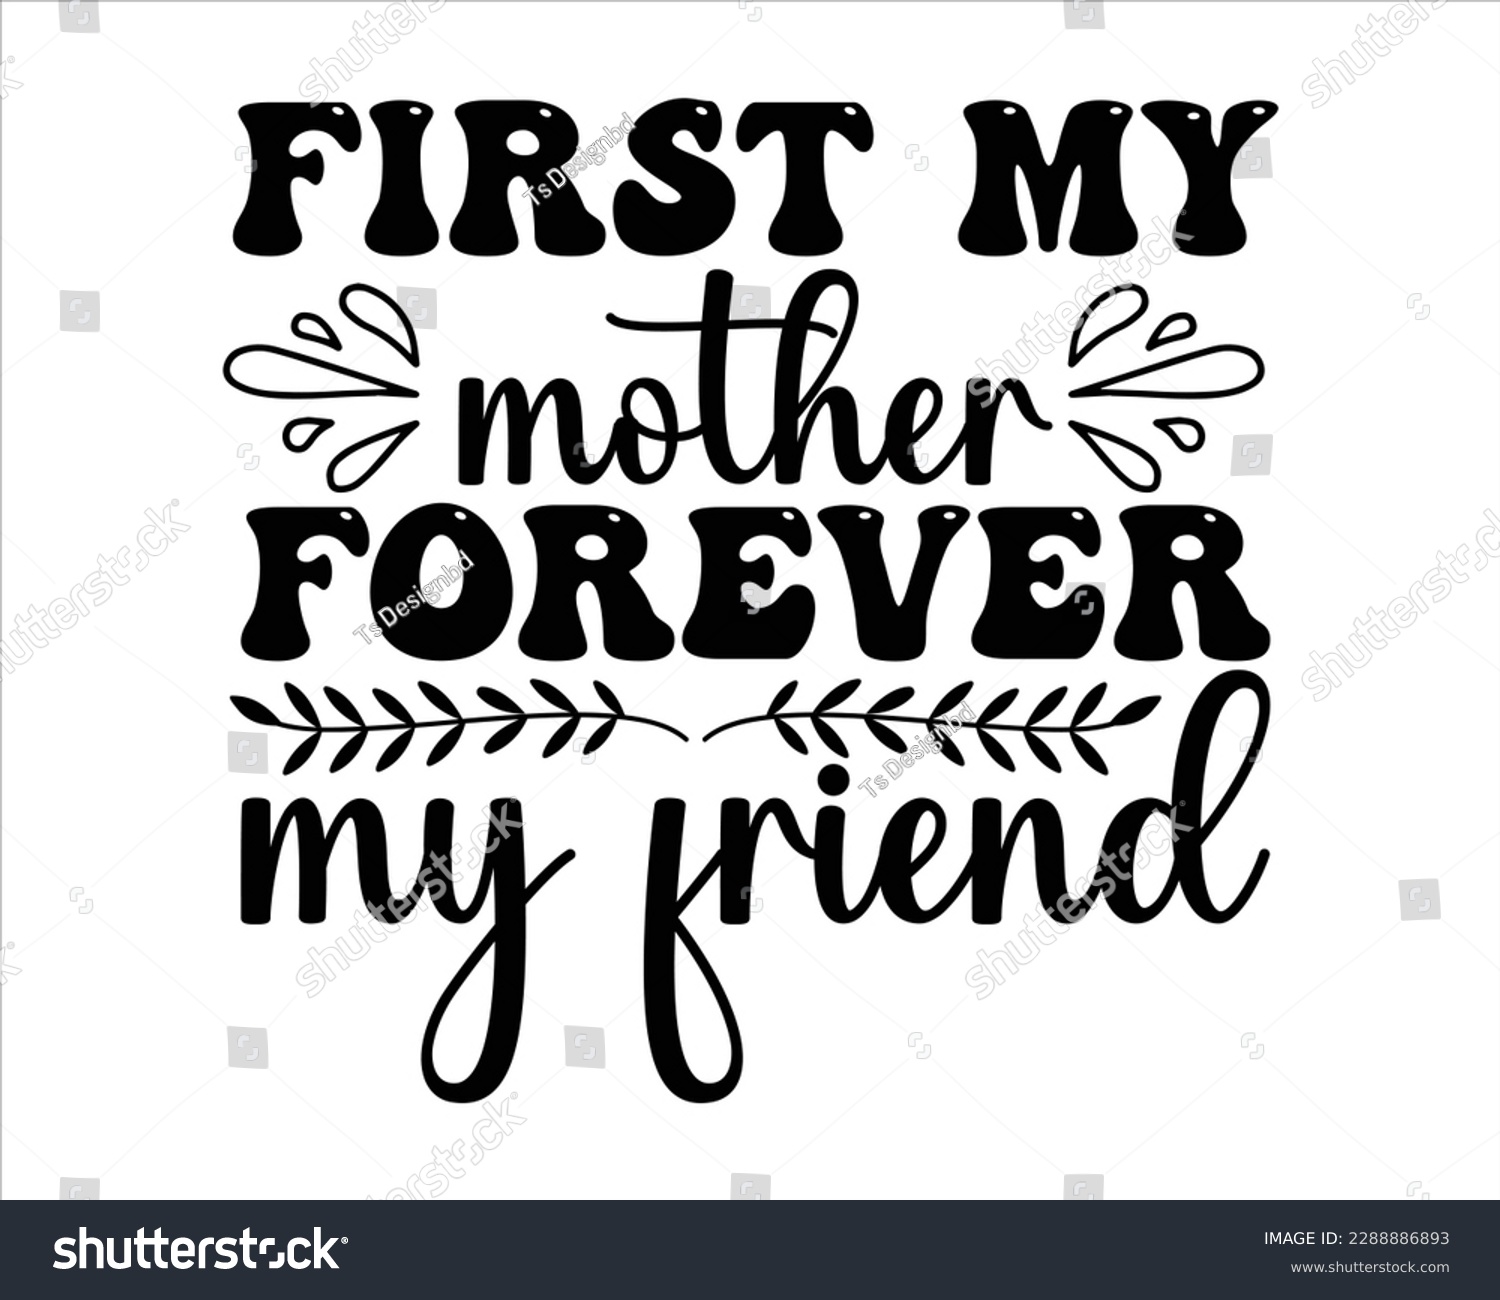 SVG of First My Mother Forever My friend Retro Svg Desig,Mom Retro svg design, Mom Life Retro Svg,funny mom svg design,Quotes about Mother, Mom Life Svg,funny mom Design,cut files svg